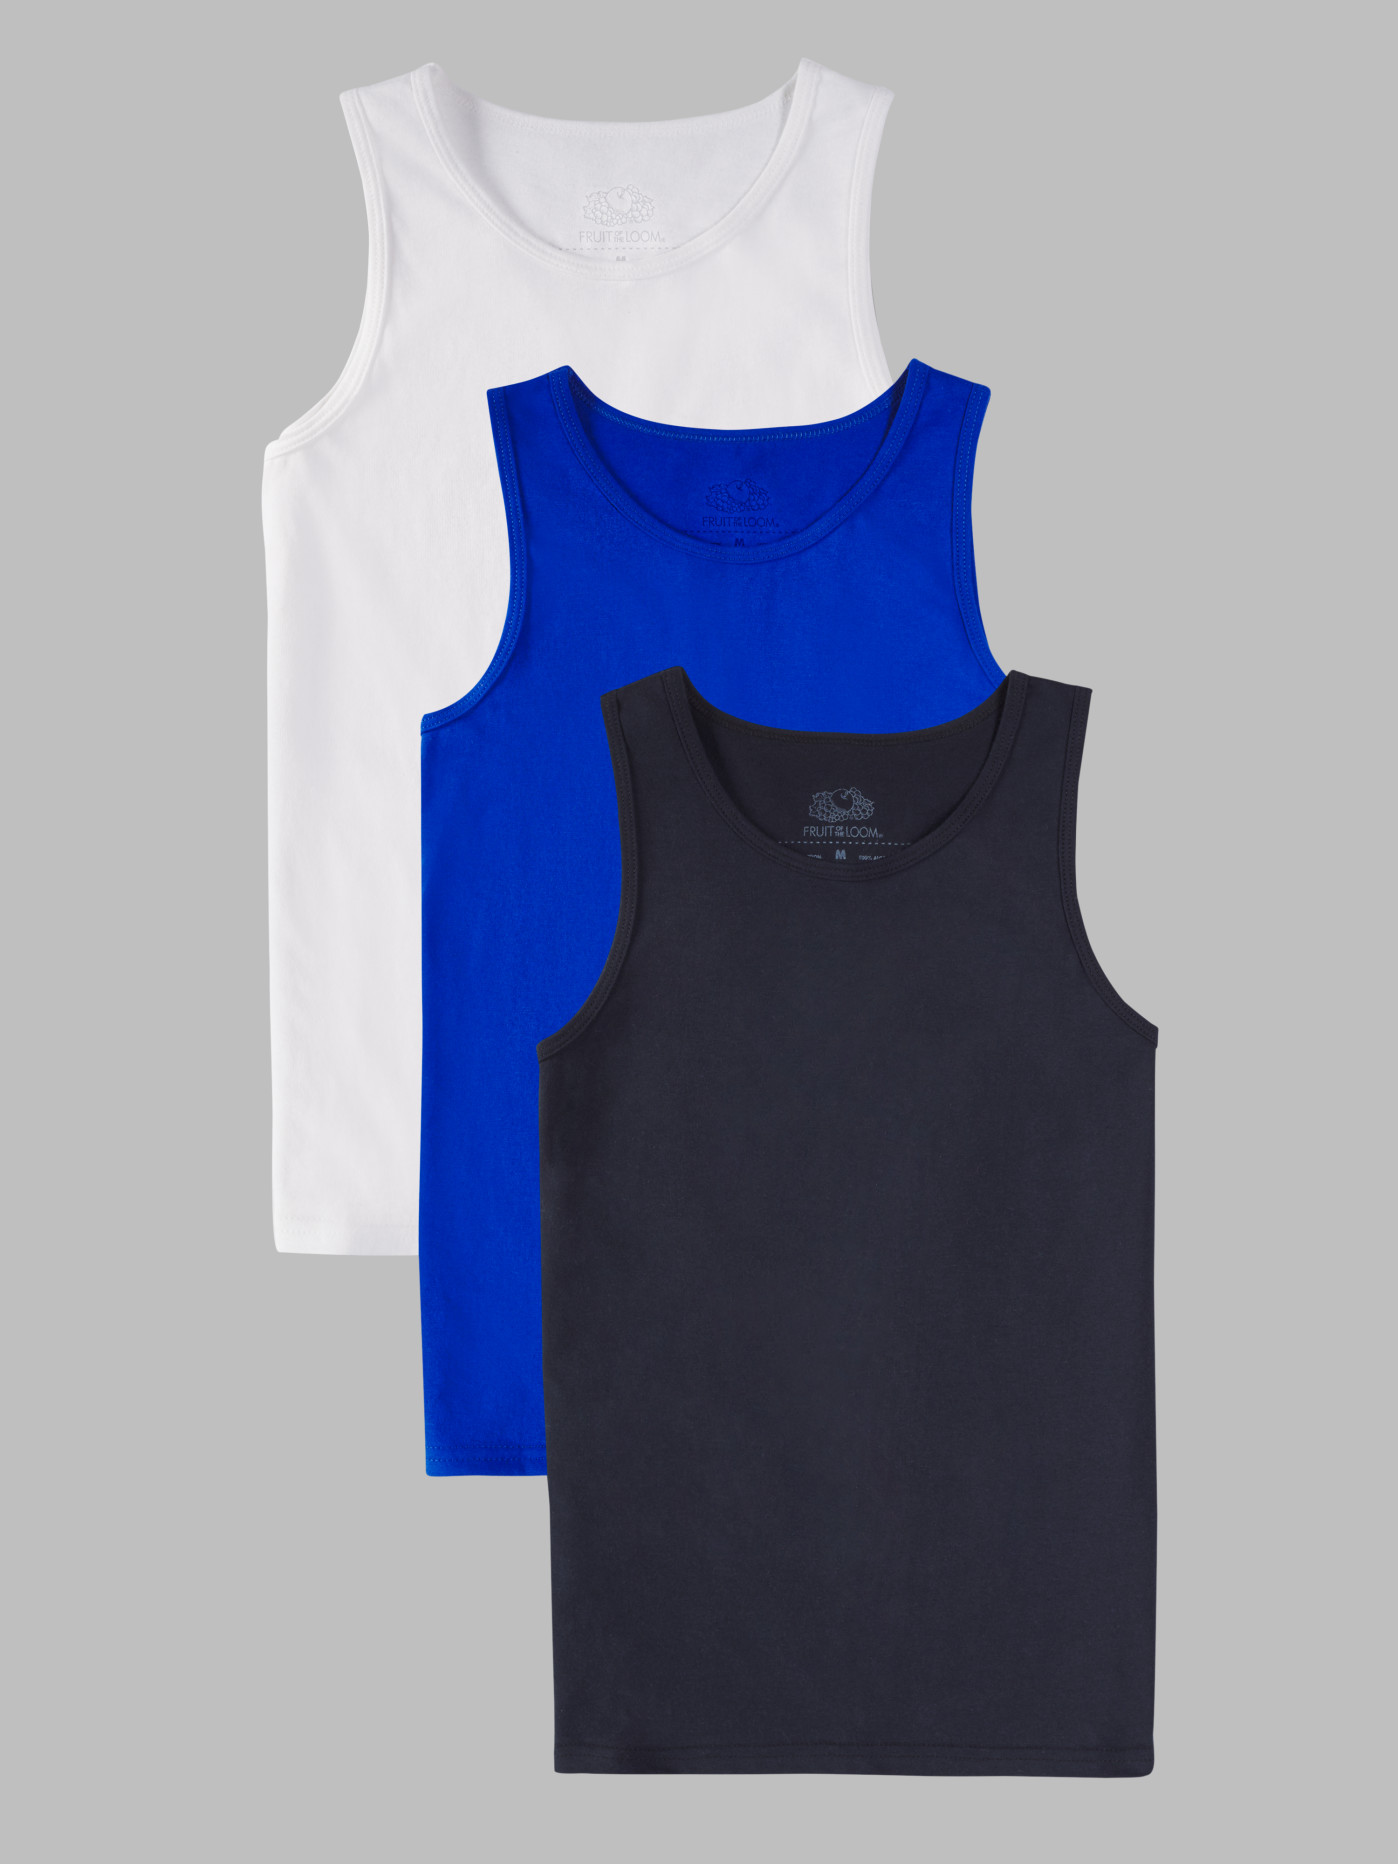 Cotton Modal Stretch Layering Tank Top 3-Pack